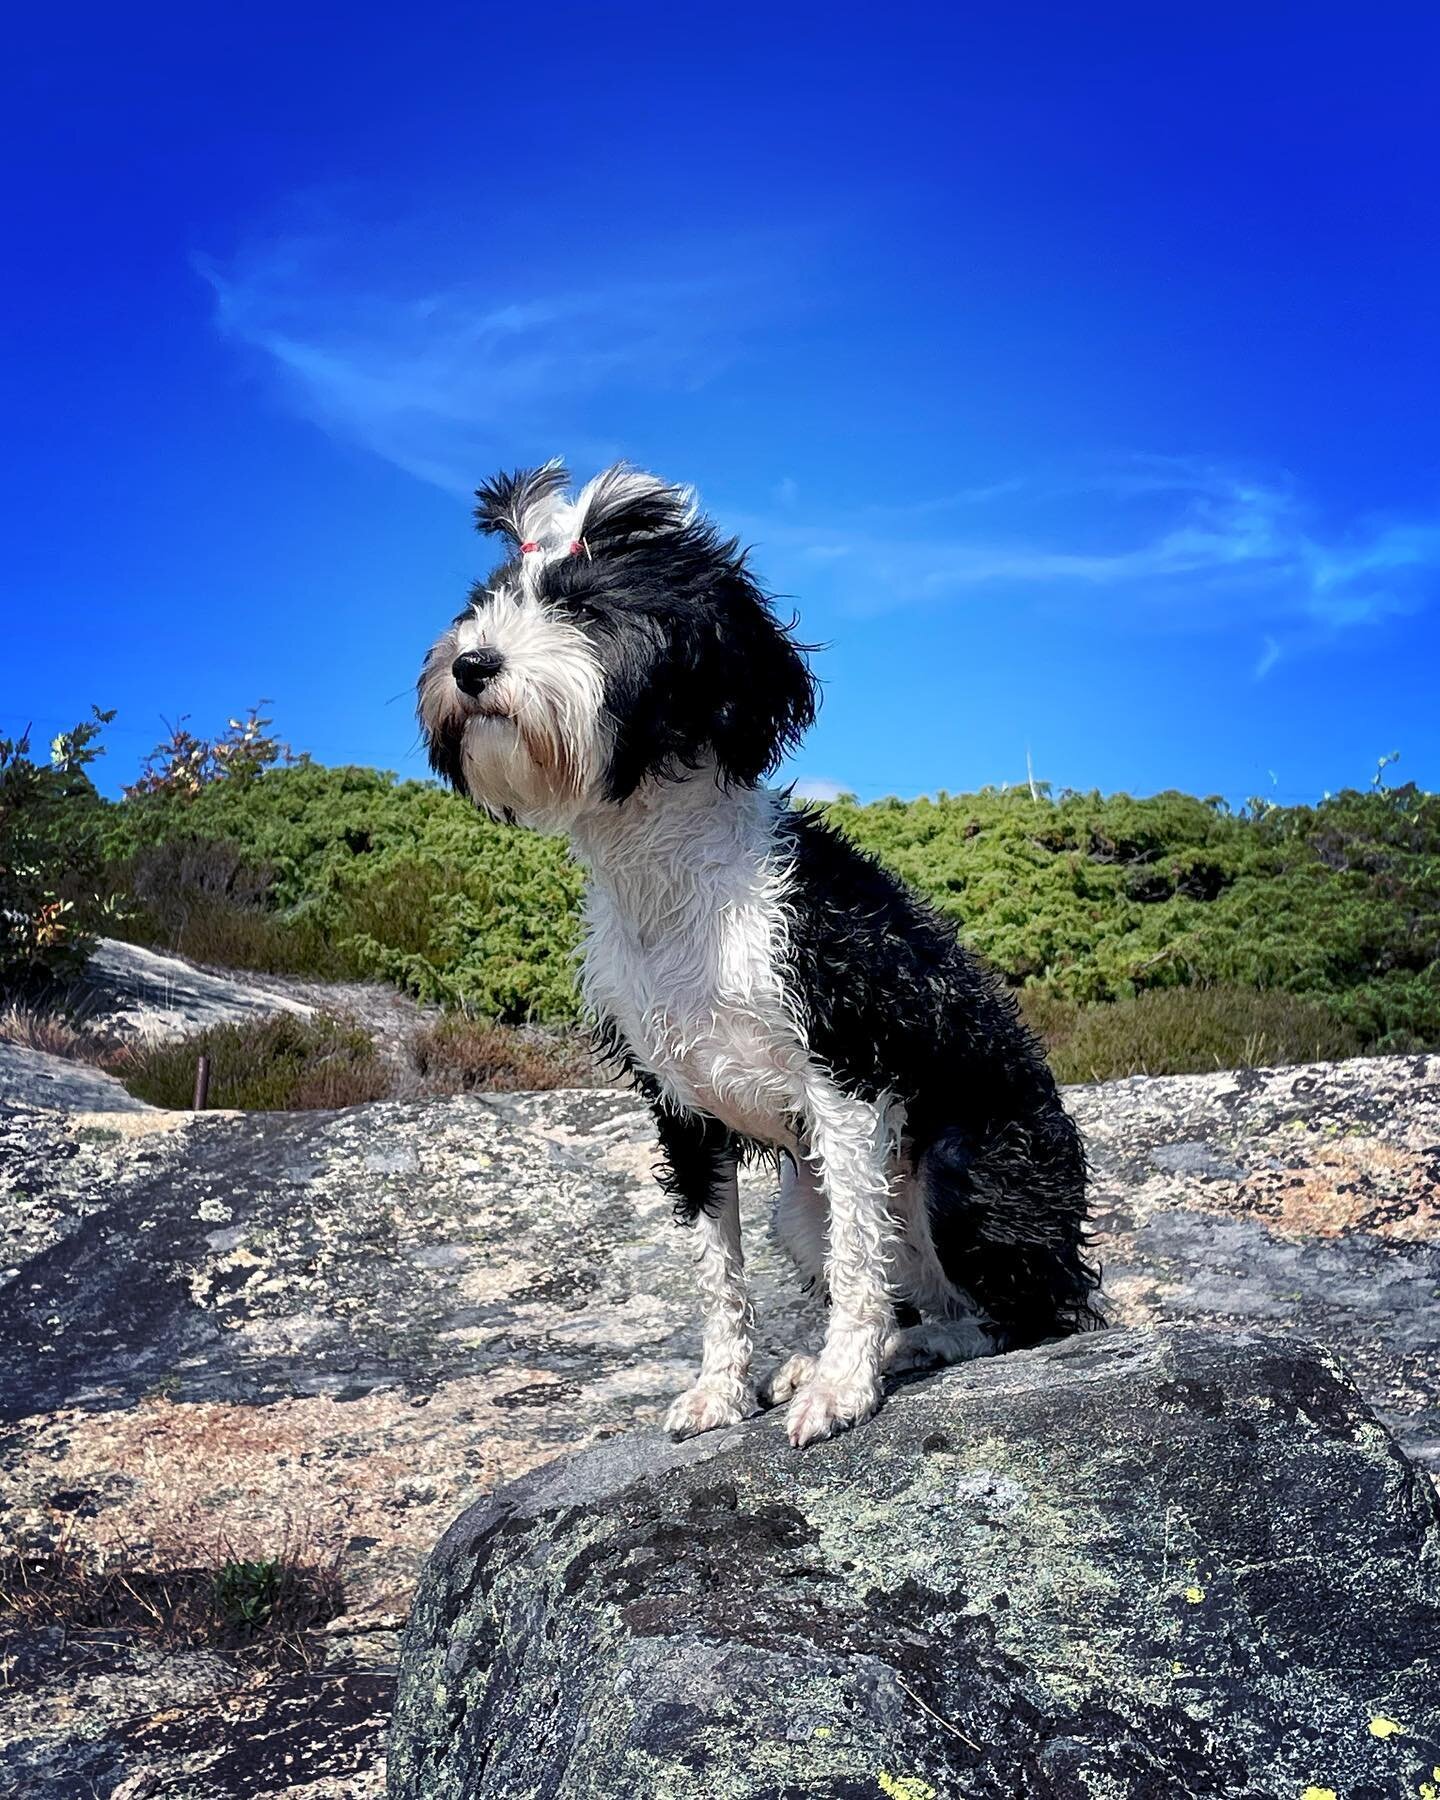 Dahlia is enjoying summer at our cabin in #str&ouml;mstad , here after a little swim in the ocean ❤️
Hope you all have a nice summer ☀️

.
.
.
.
.
.
.
.
.
.

#dogphotographer #dogphoto
#tibetanterrier #tibetanterriersofinstagram #tibetanterrierlove #